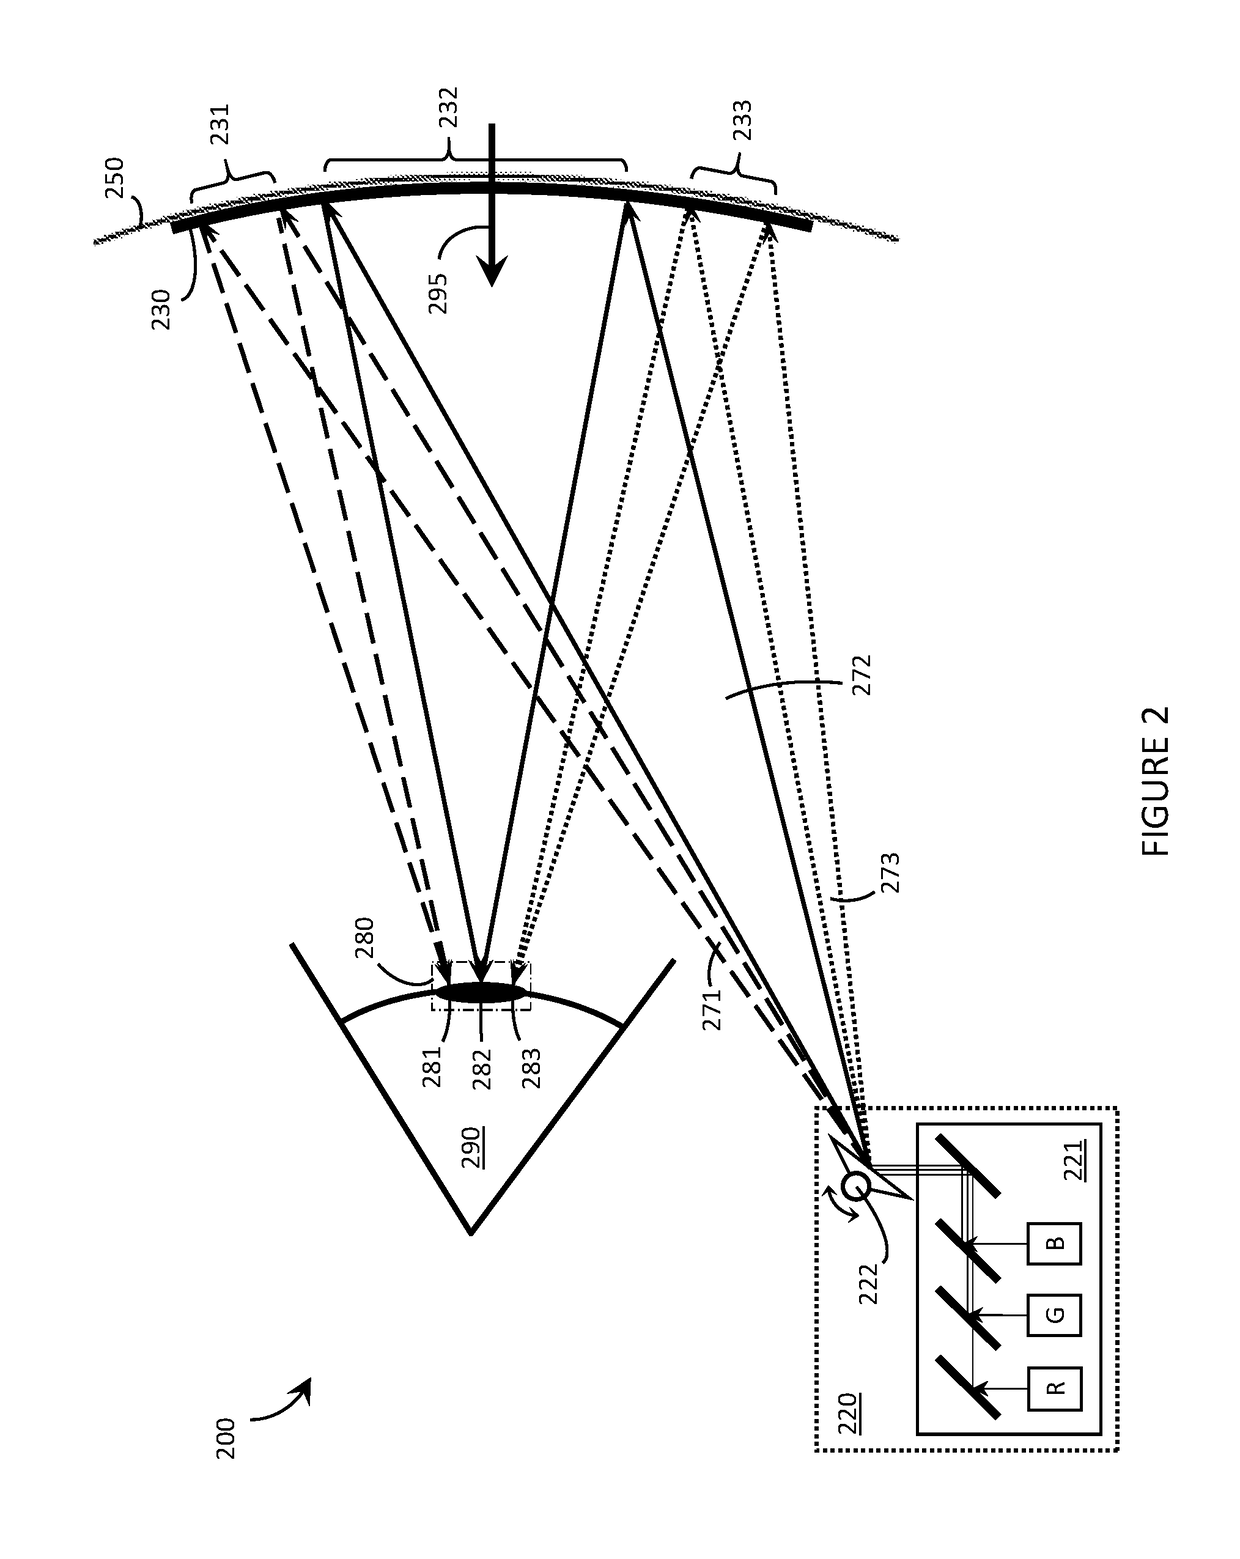 Systems, devices, and methods for spatially-multiplexed holographic optical elements